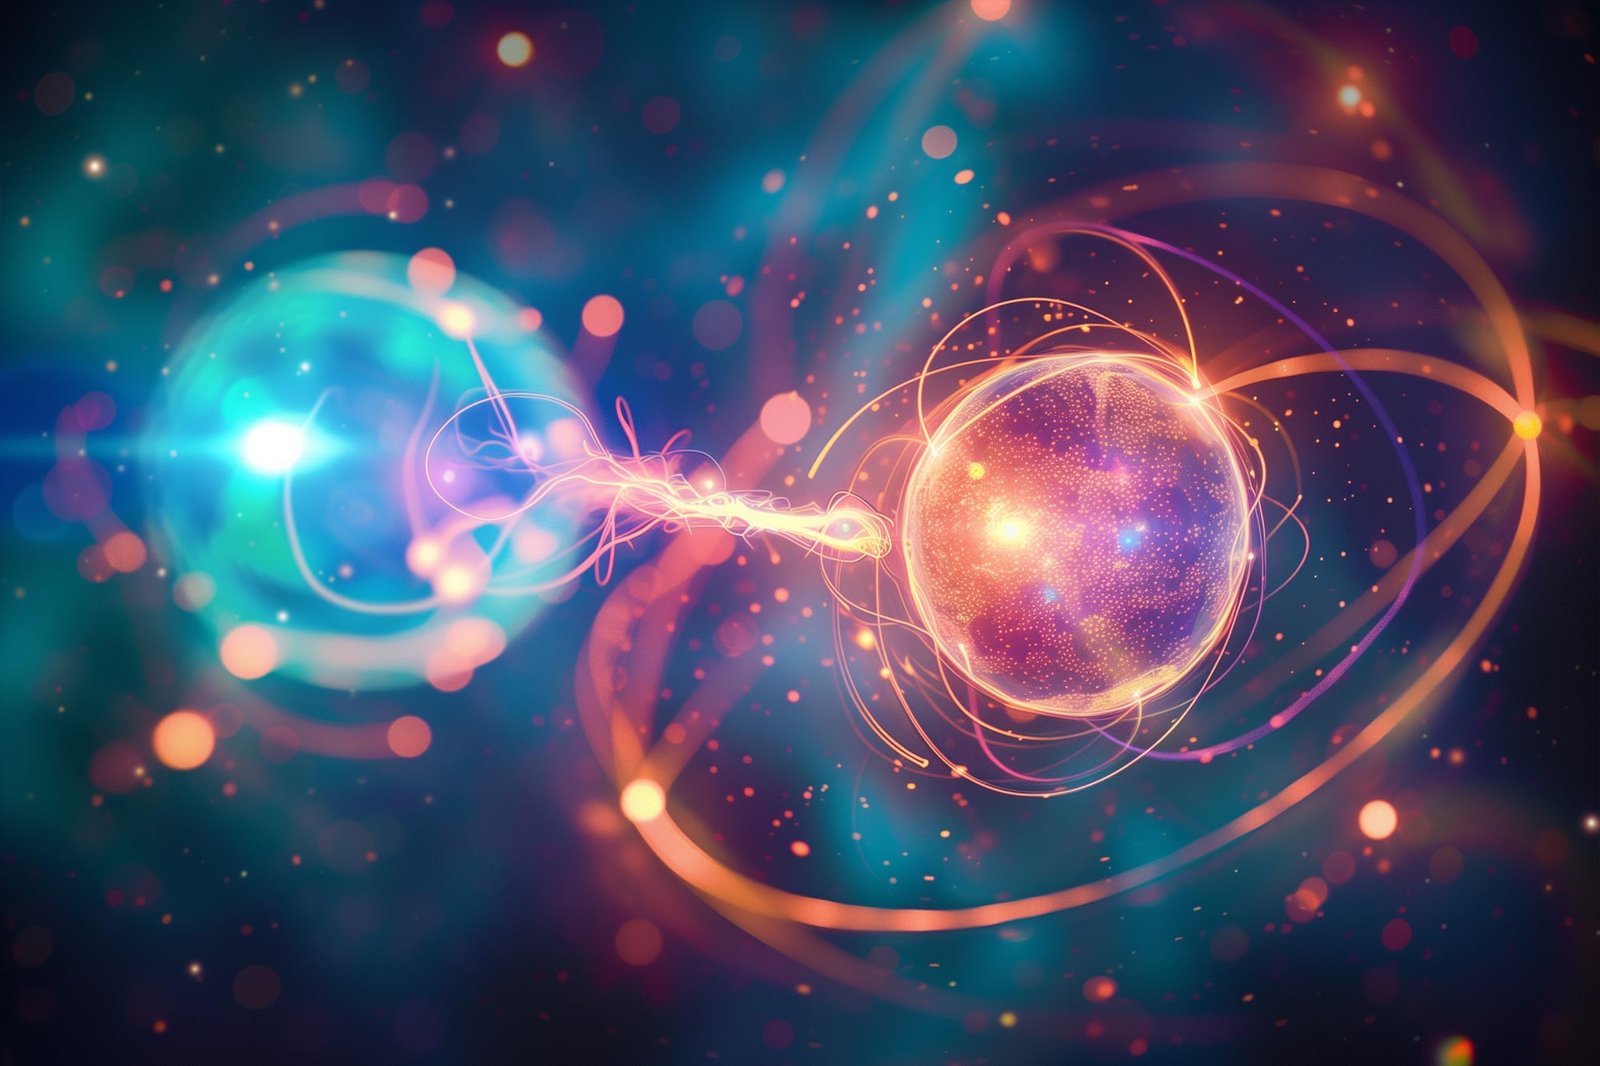 Einstein’s “Spooky Action at a Distance” Between the Heaviest Particles at the Large Hadron Collider